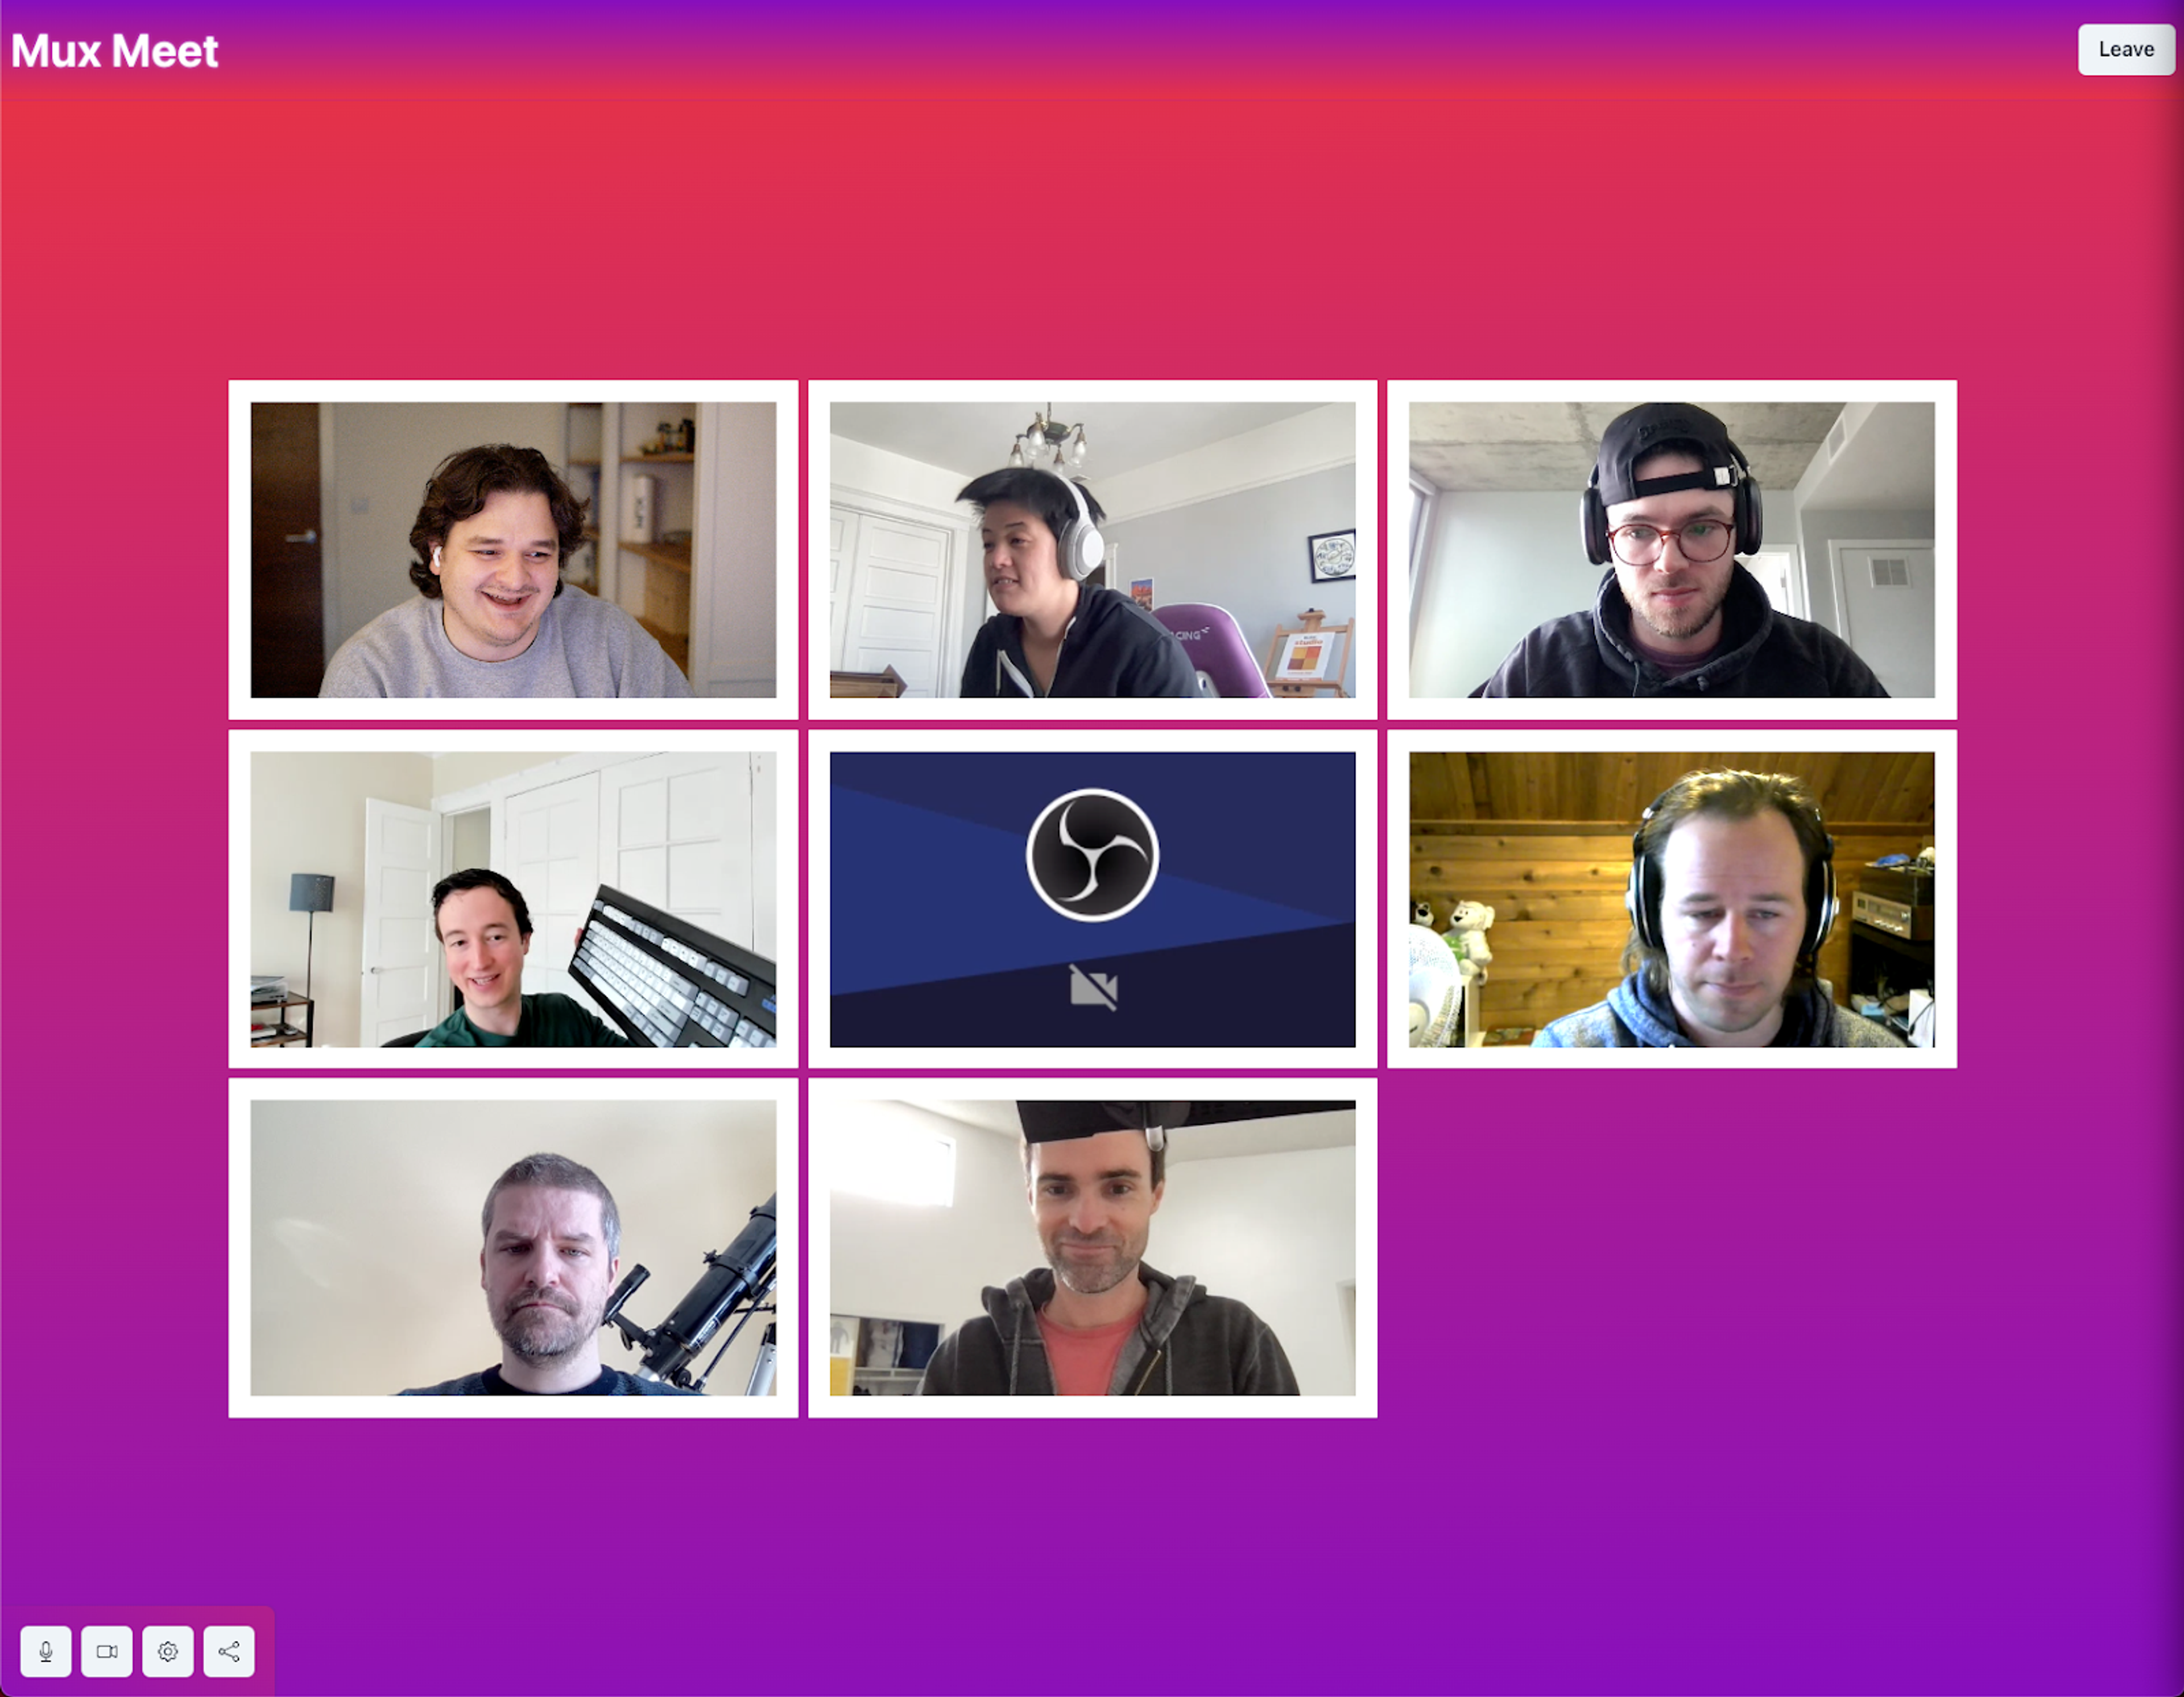 A screenshot of an early version of Mux Meet before a designer stepped in. It's bright pink. There are 8 participants on a video conferencing call. 